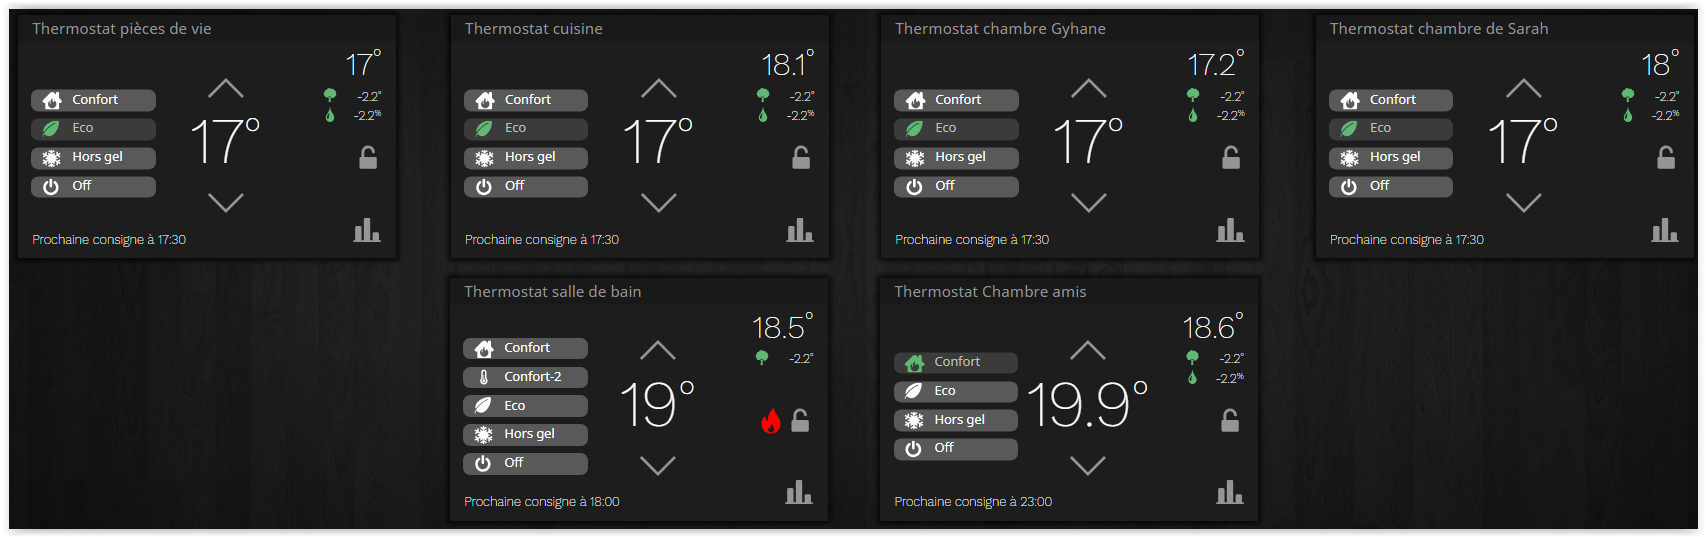 thermostat alternateview.PNG